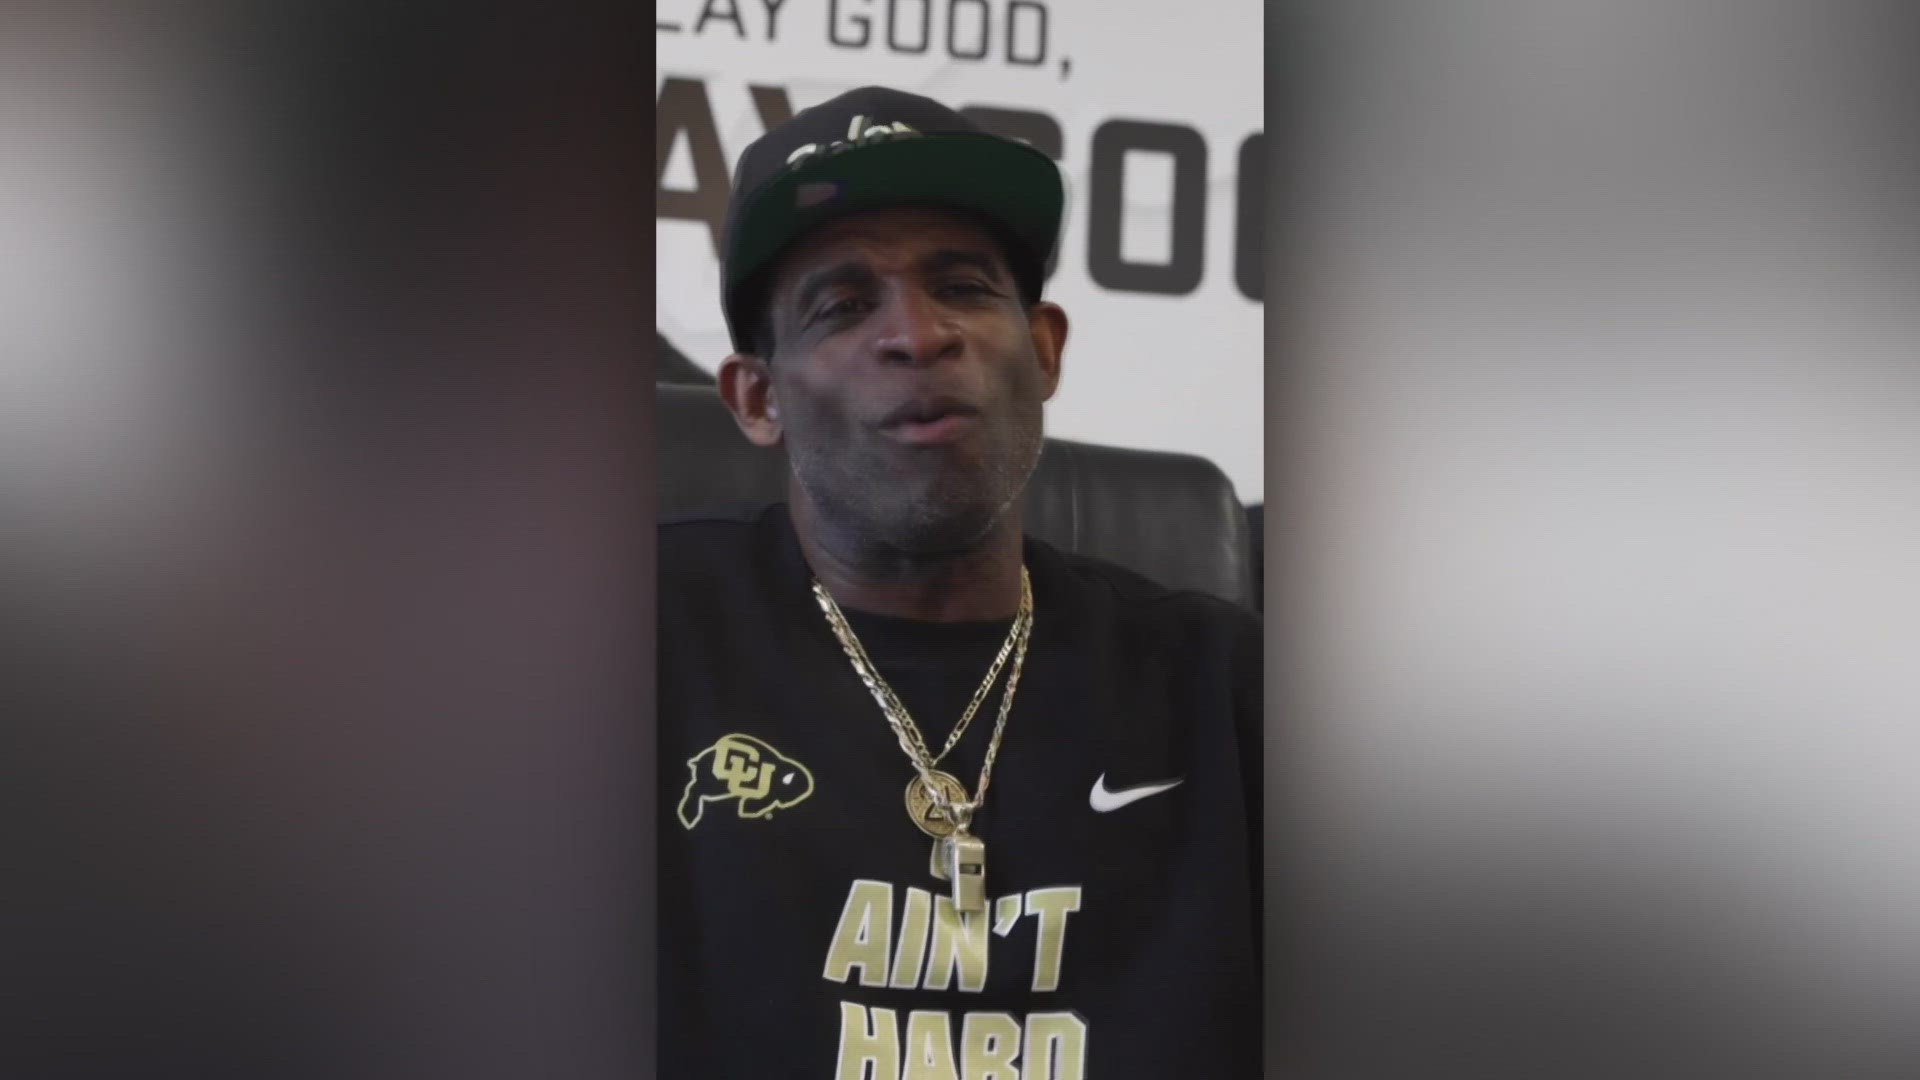 Deion Sanders says he will undergo surgery for blood clots in both legs